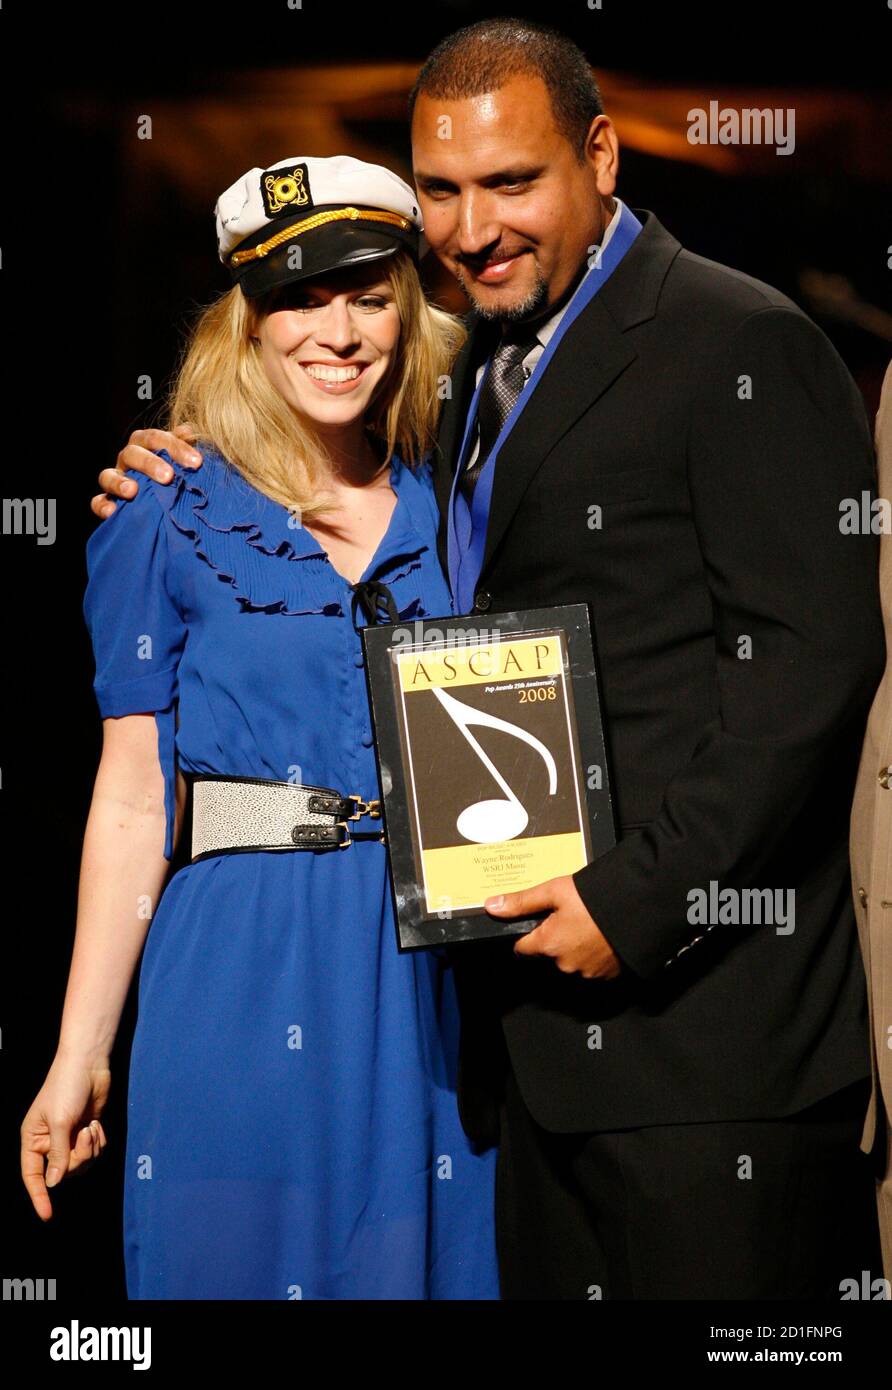 Co-writers Natasha Bedingfield (L) and Wayne Rodrigues pose after receiving a pop award for the song 'Unwritten' during the 25th Annual ASCAP Pop Music Awards at the Kodak theatre in Hollywood, California, April 9, 2008. REUTERS/Danny Moloshok (UNITED STATES) Stock Photo